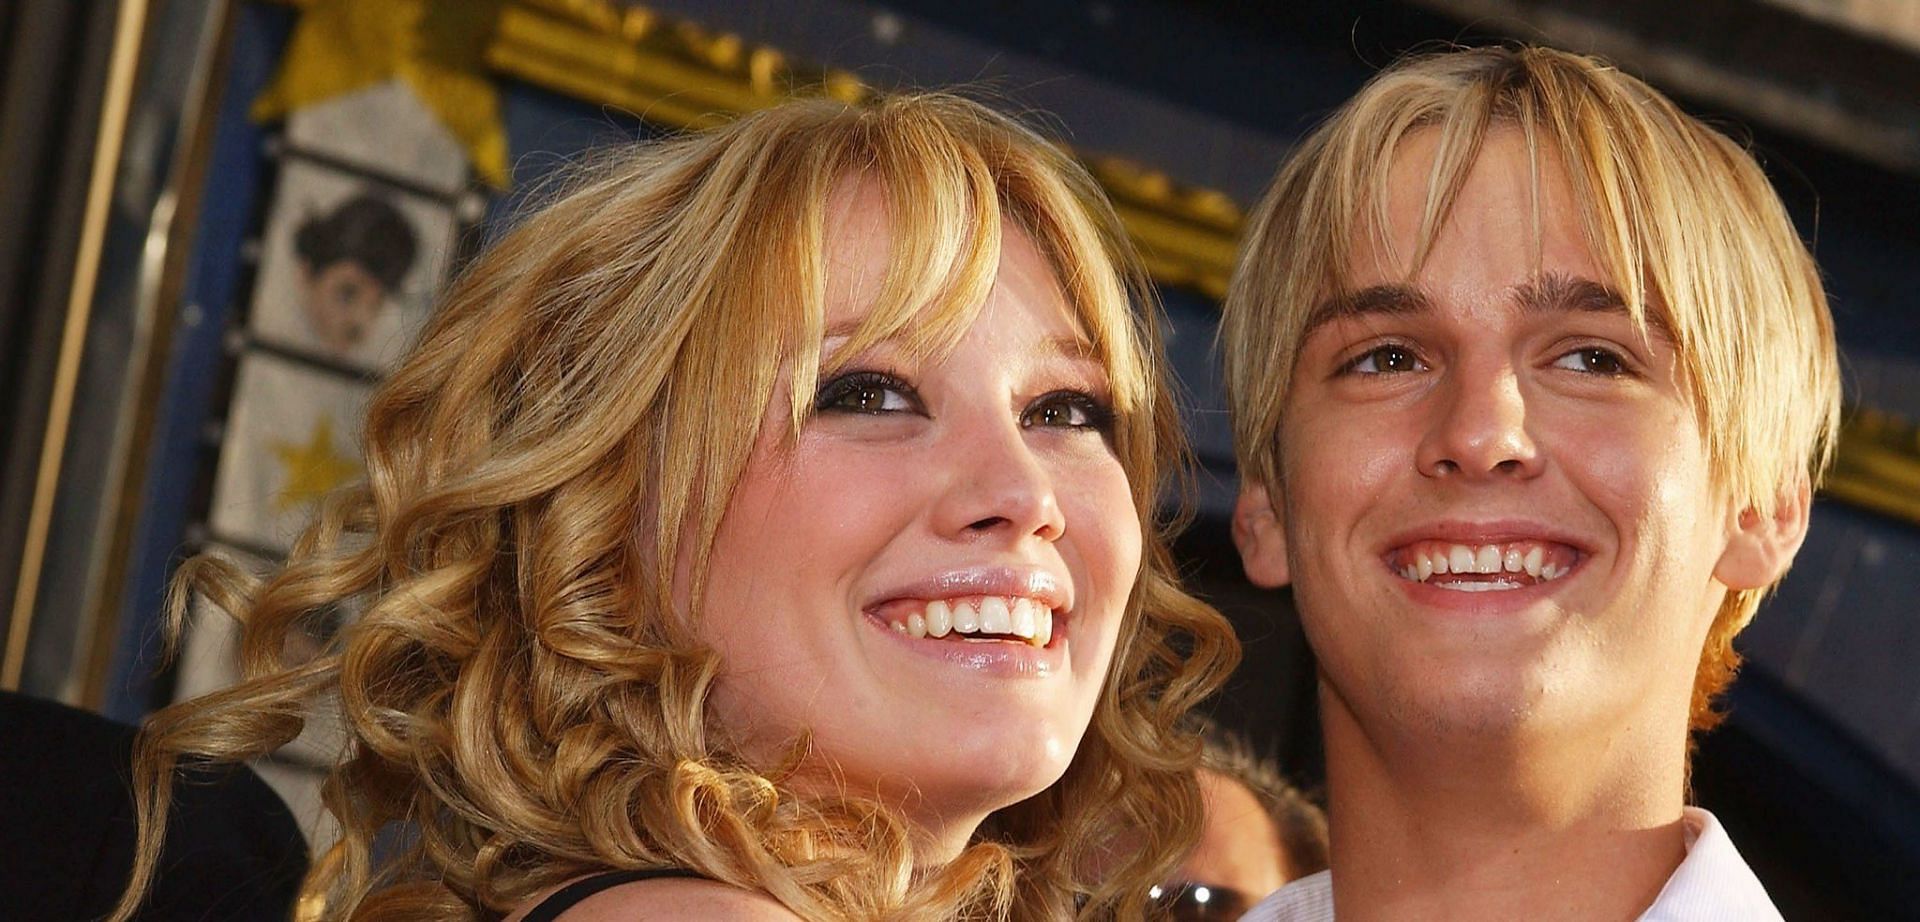 Aaron Carter and Hilary Duff dated back in 2000s (Image via Getty Images)